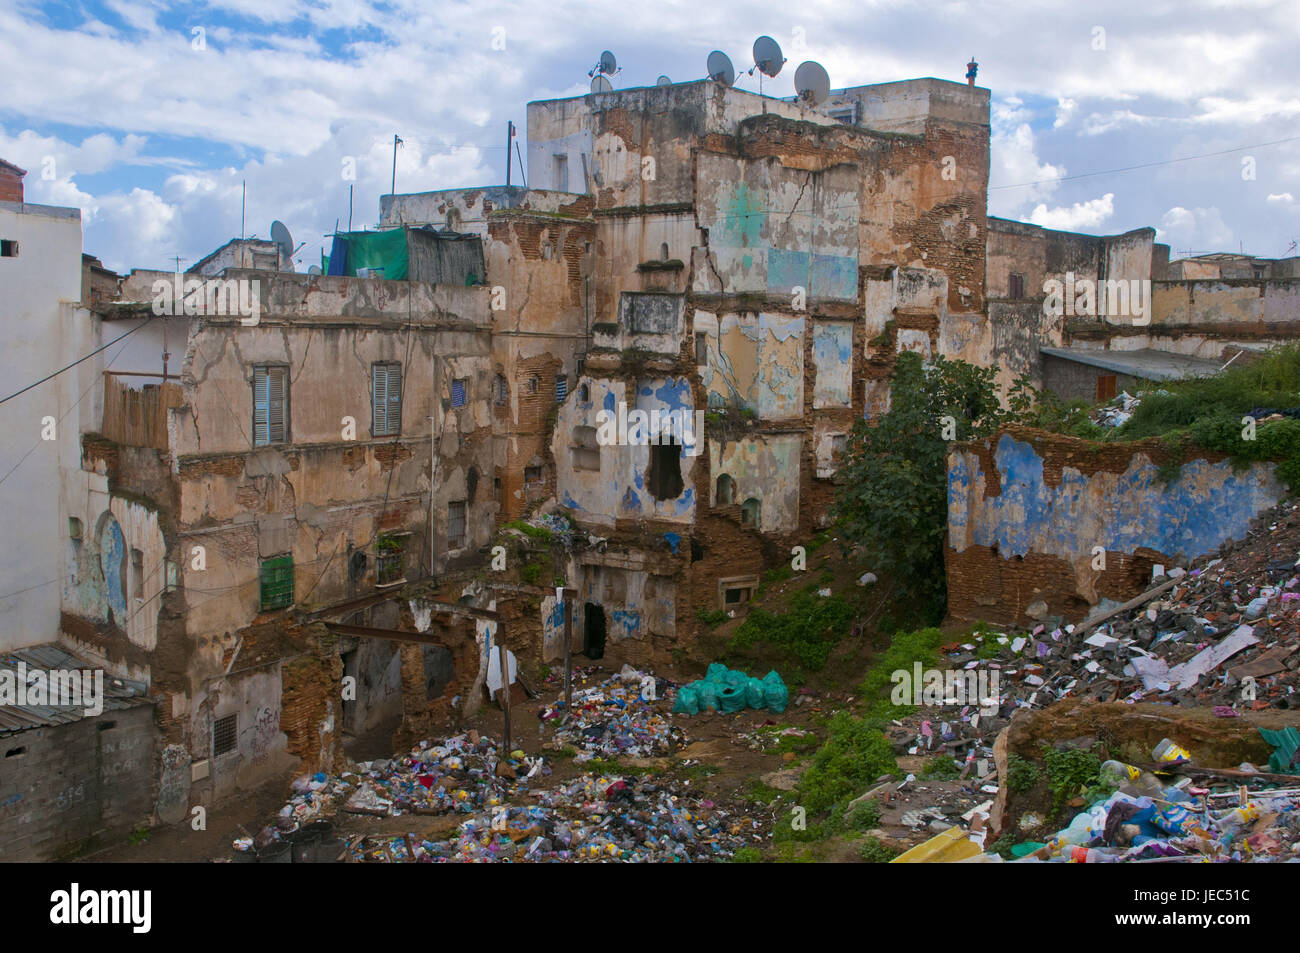 Decayed house in the UNESCO-world cultural heritage the kasbah, Old Town of Algiers, capital of Algeria, Africa, Stock Photo